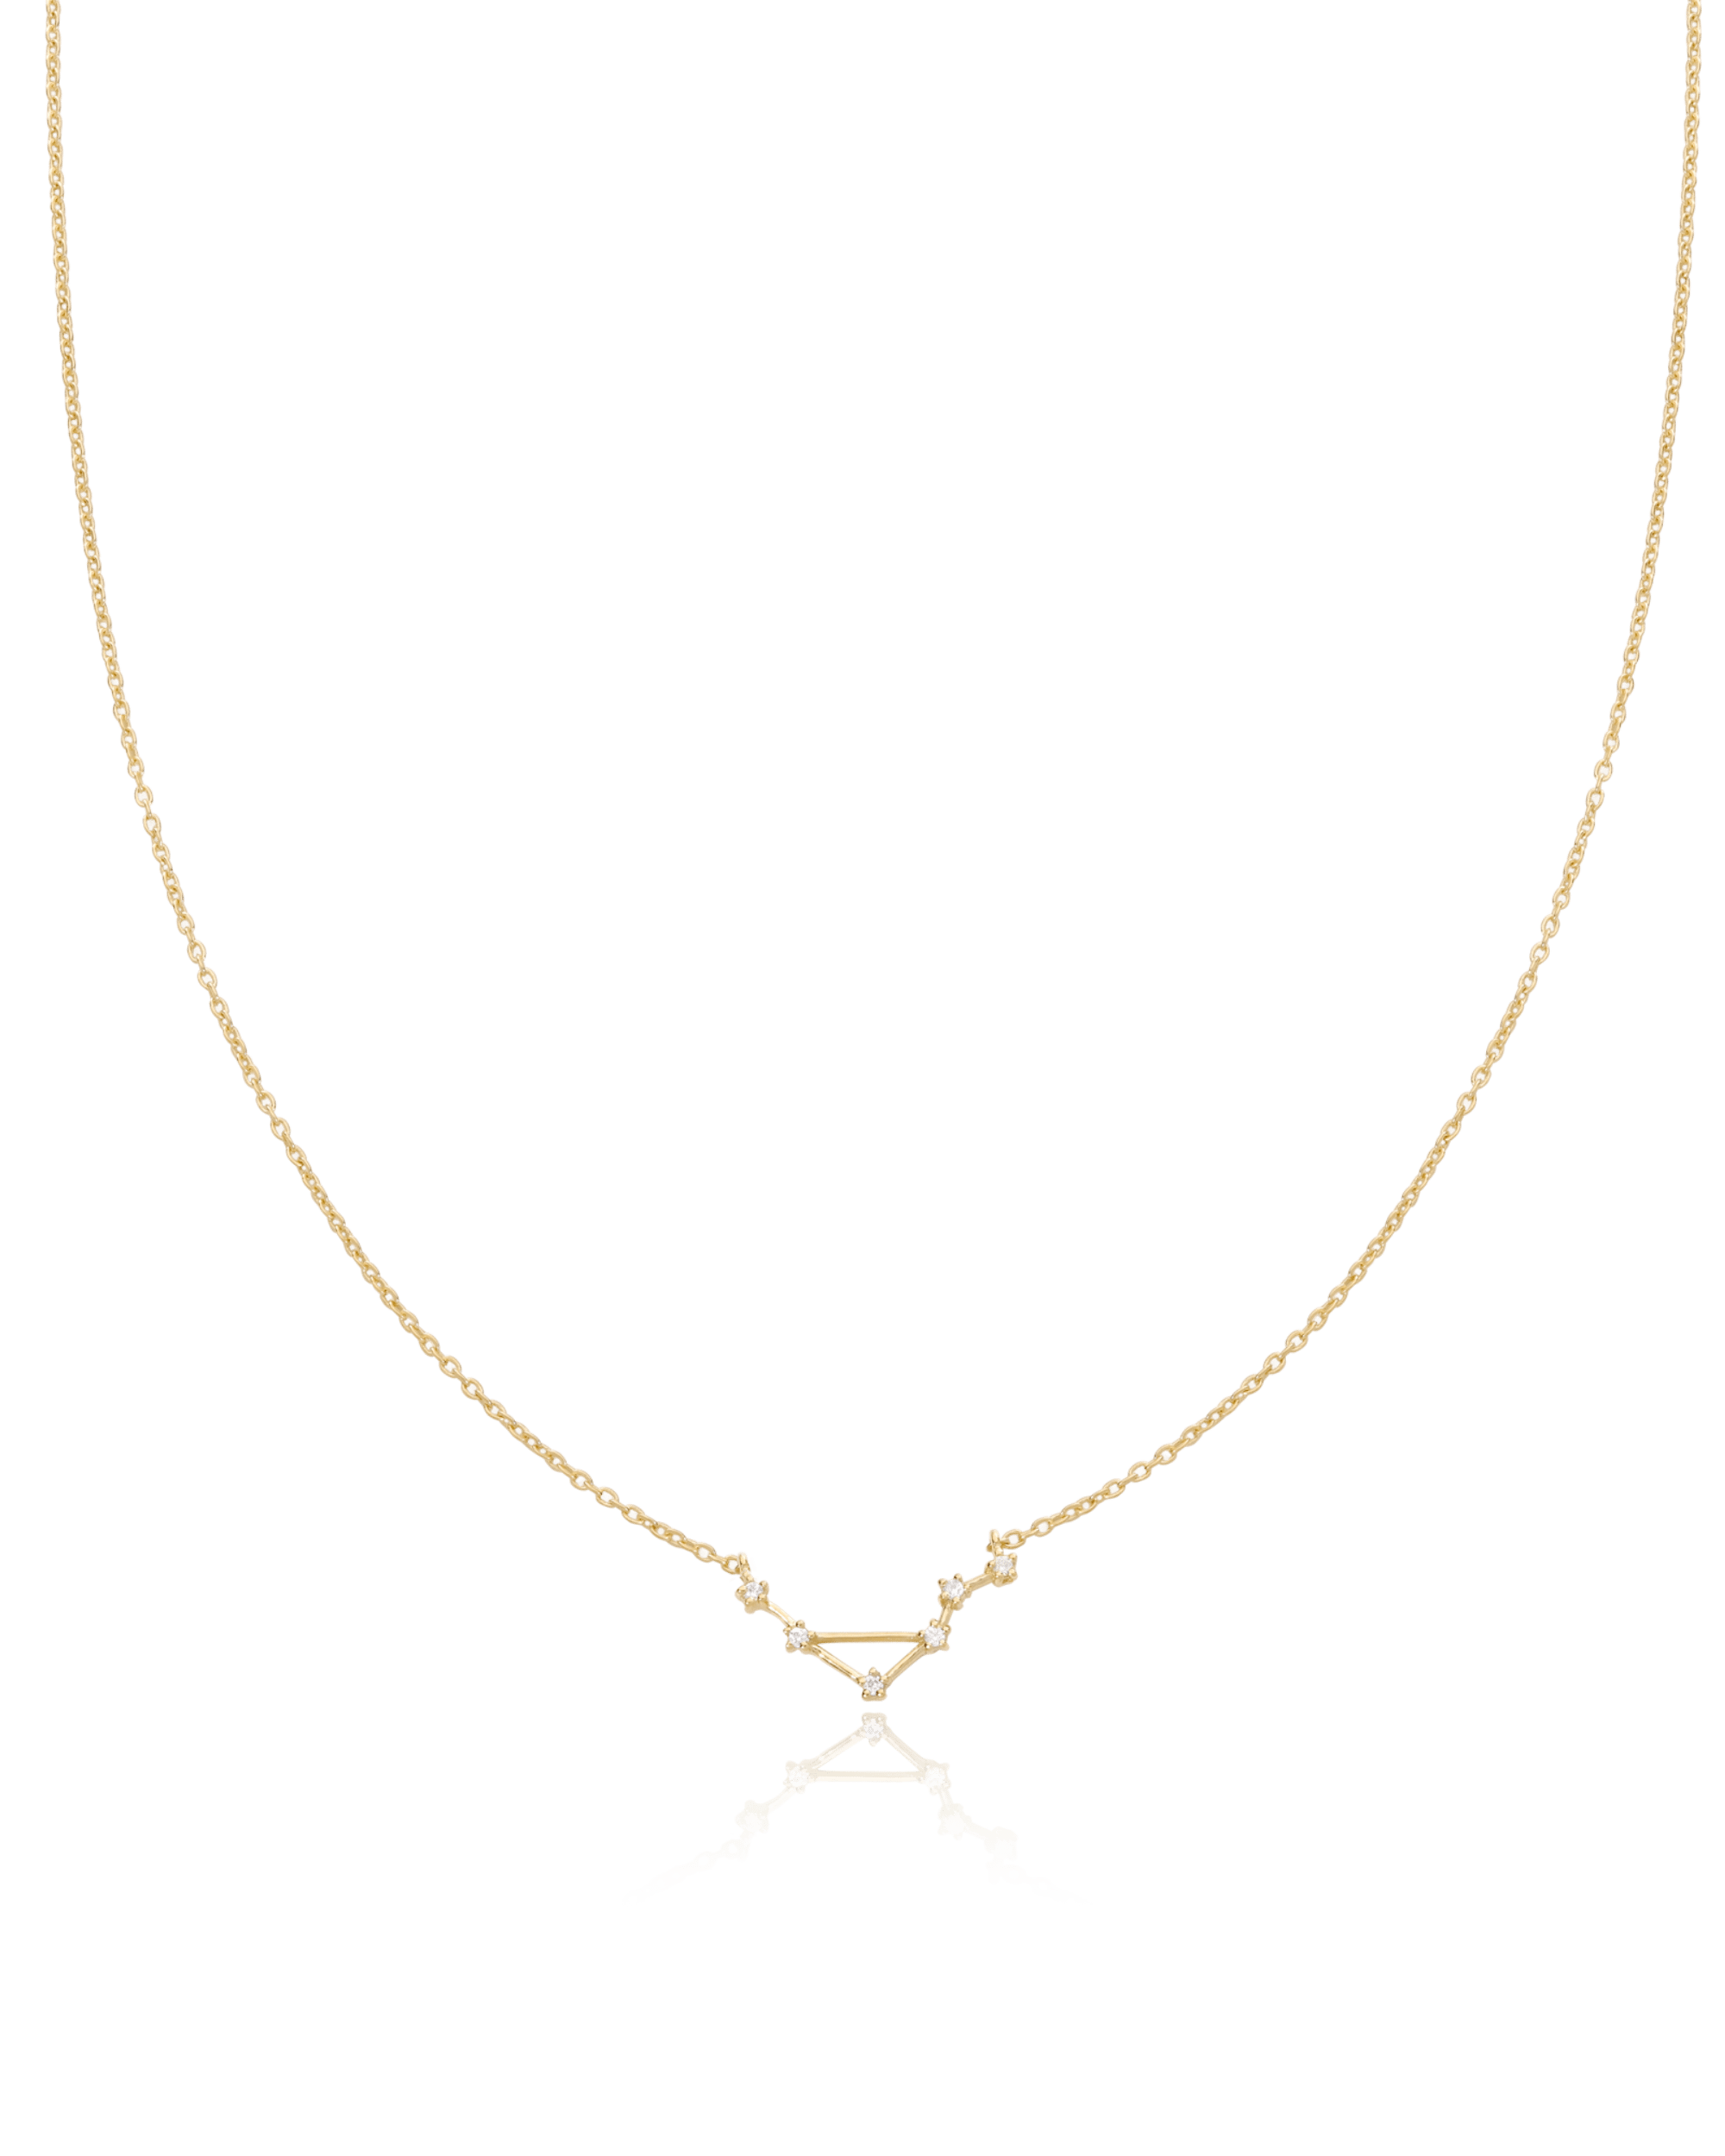 Constellation Necklace with Diamonds - 18K Gold Vermeil Necklaces magal-dev 